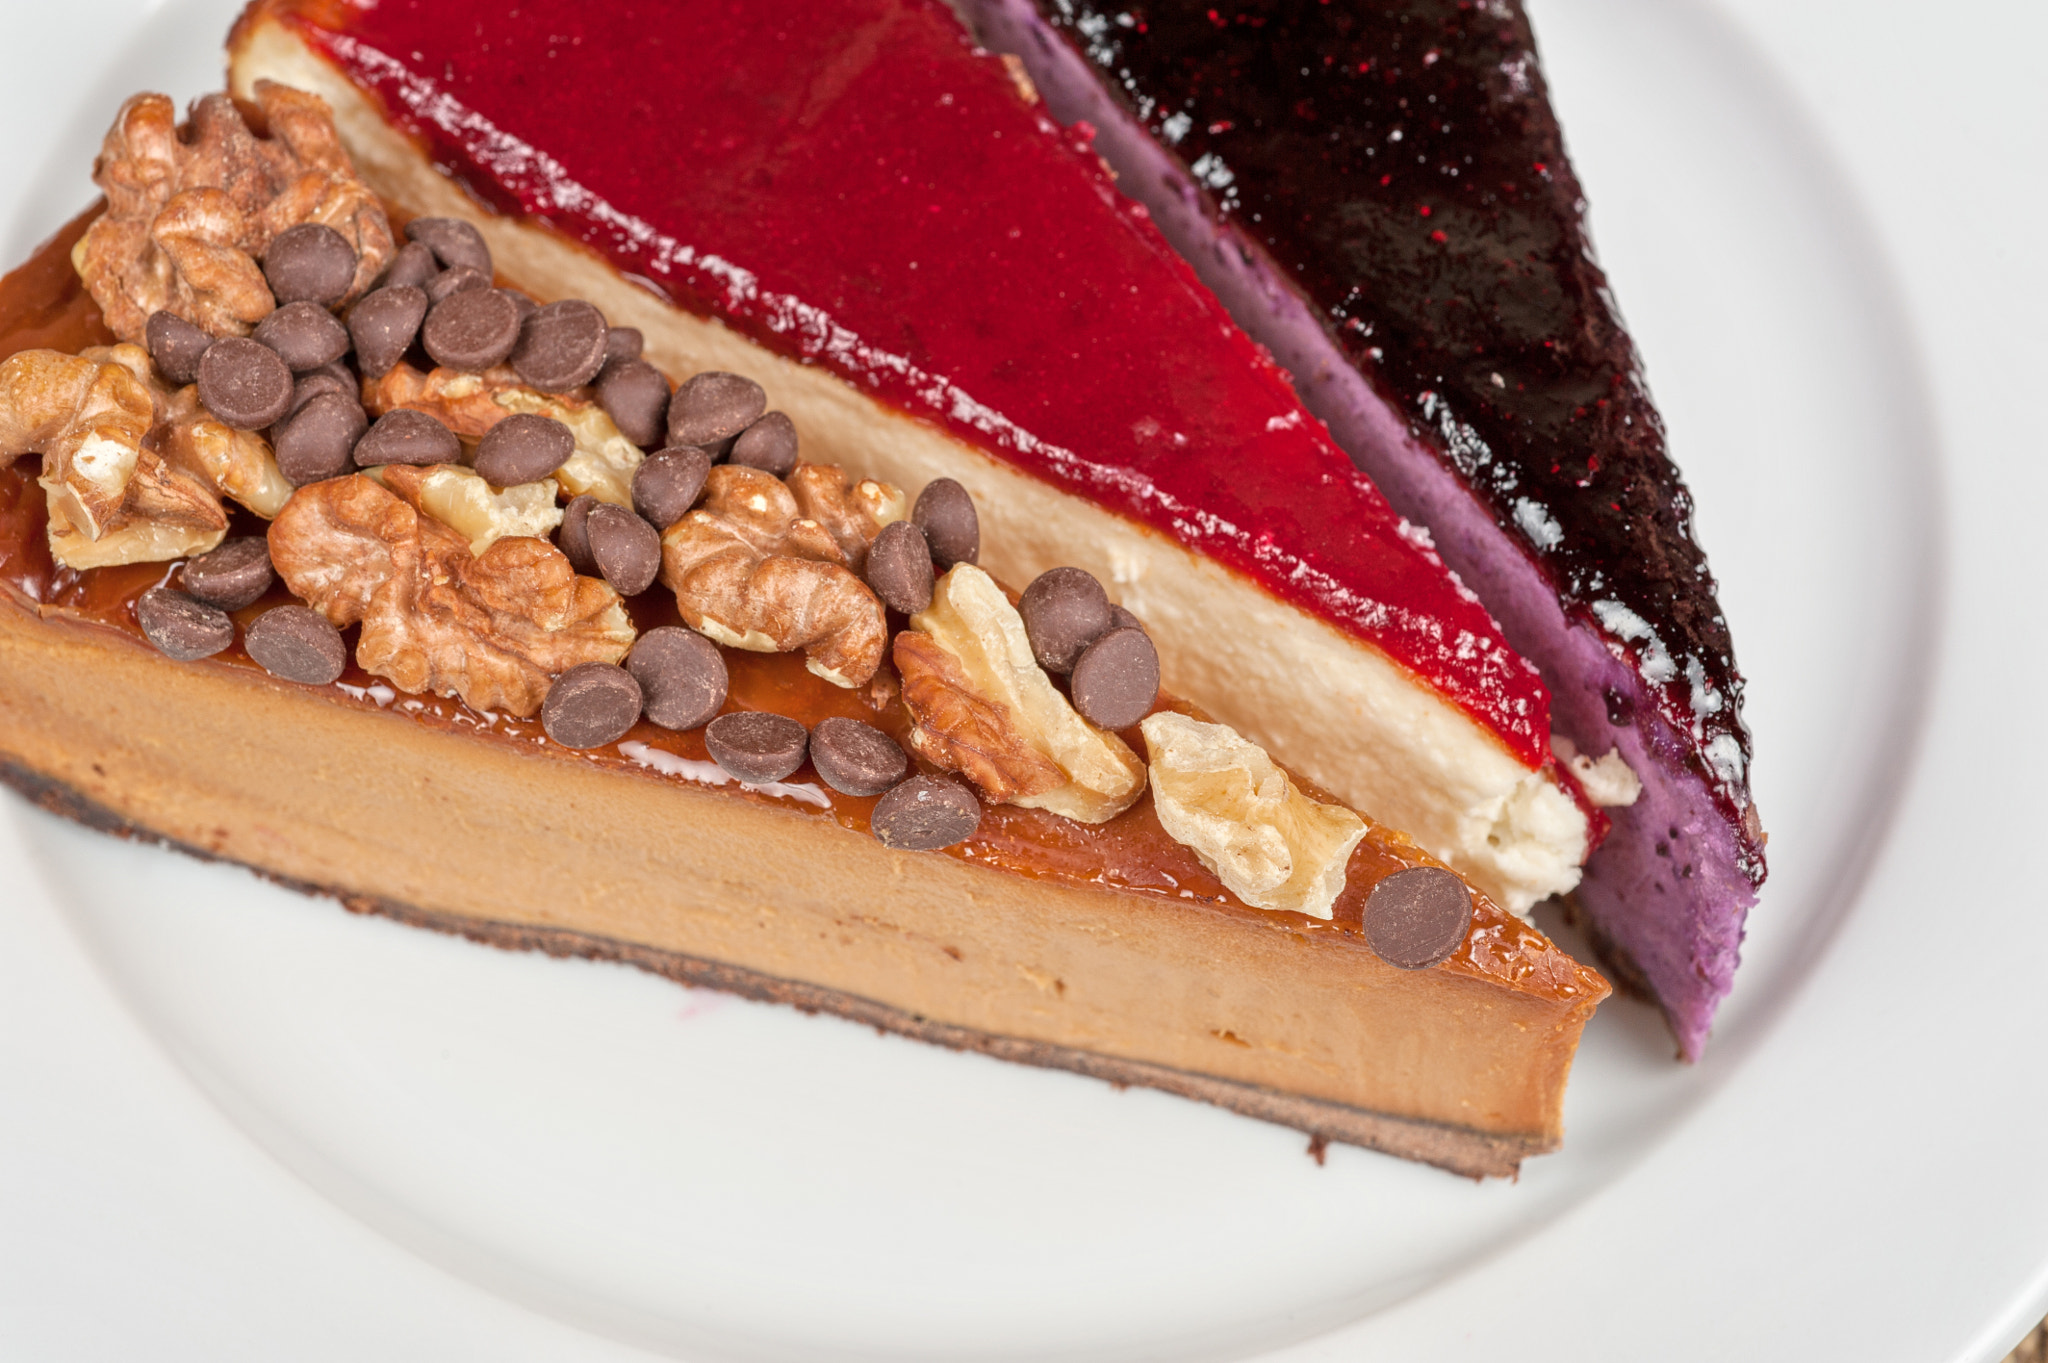 Nikon D700 sample photo. Cheesecake with chocolate and nuts photography